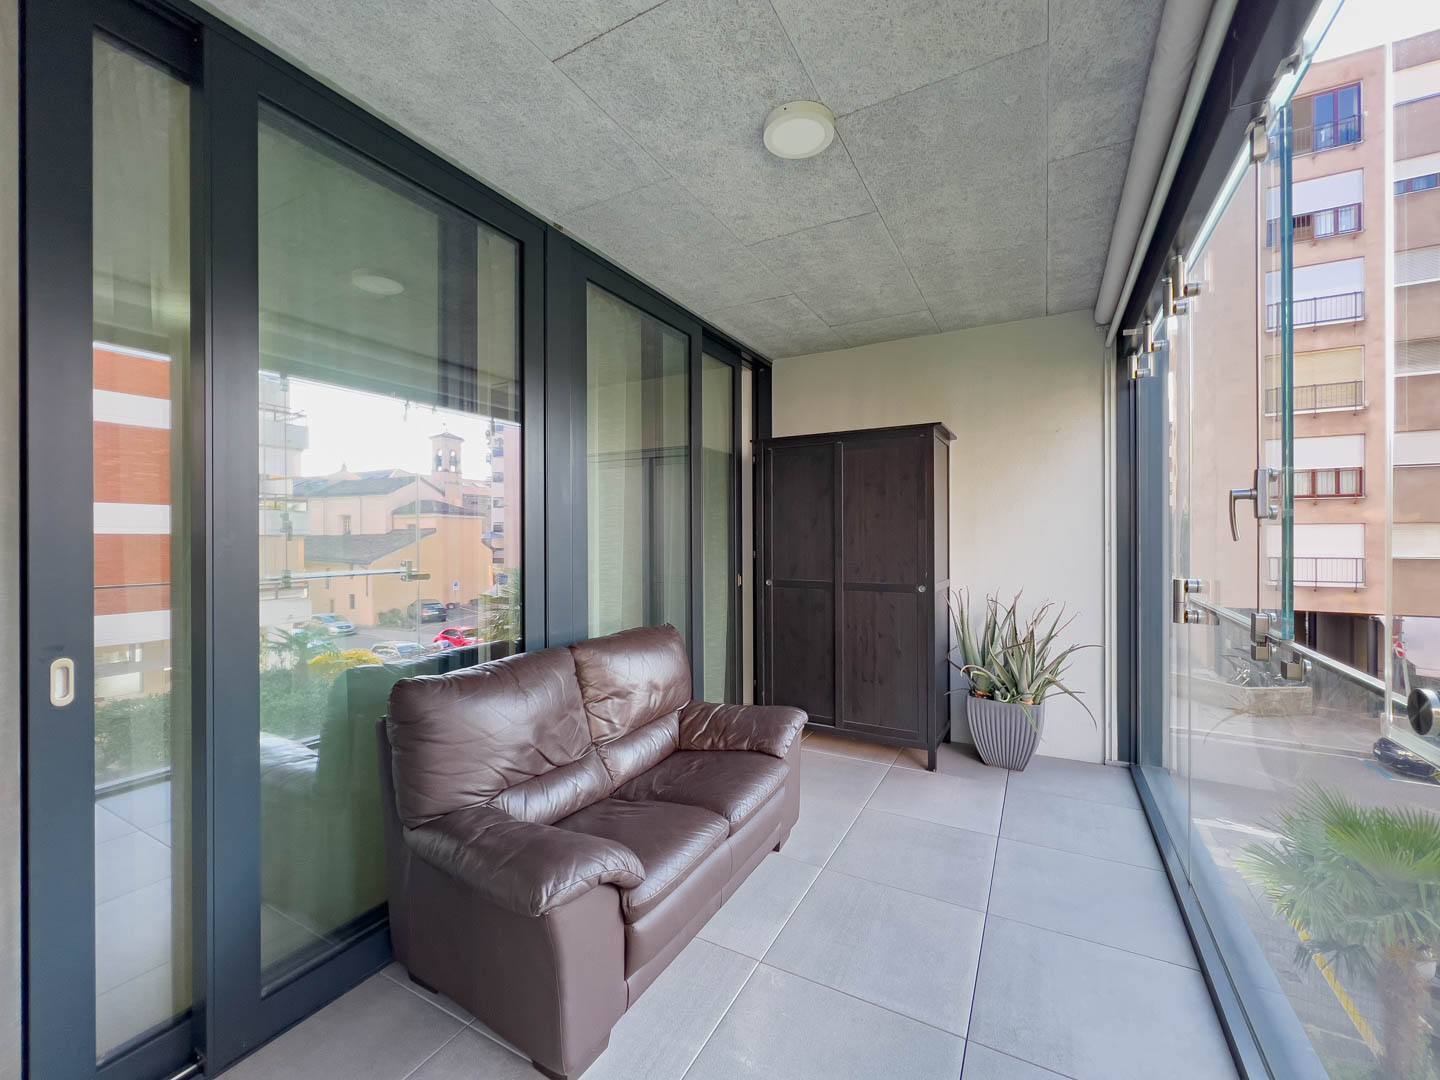 Modern apartment for sale in Lugano in an elegant building of recent construction